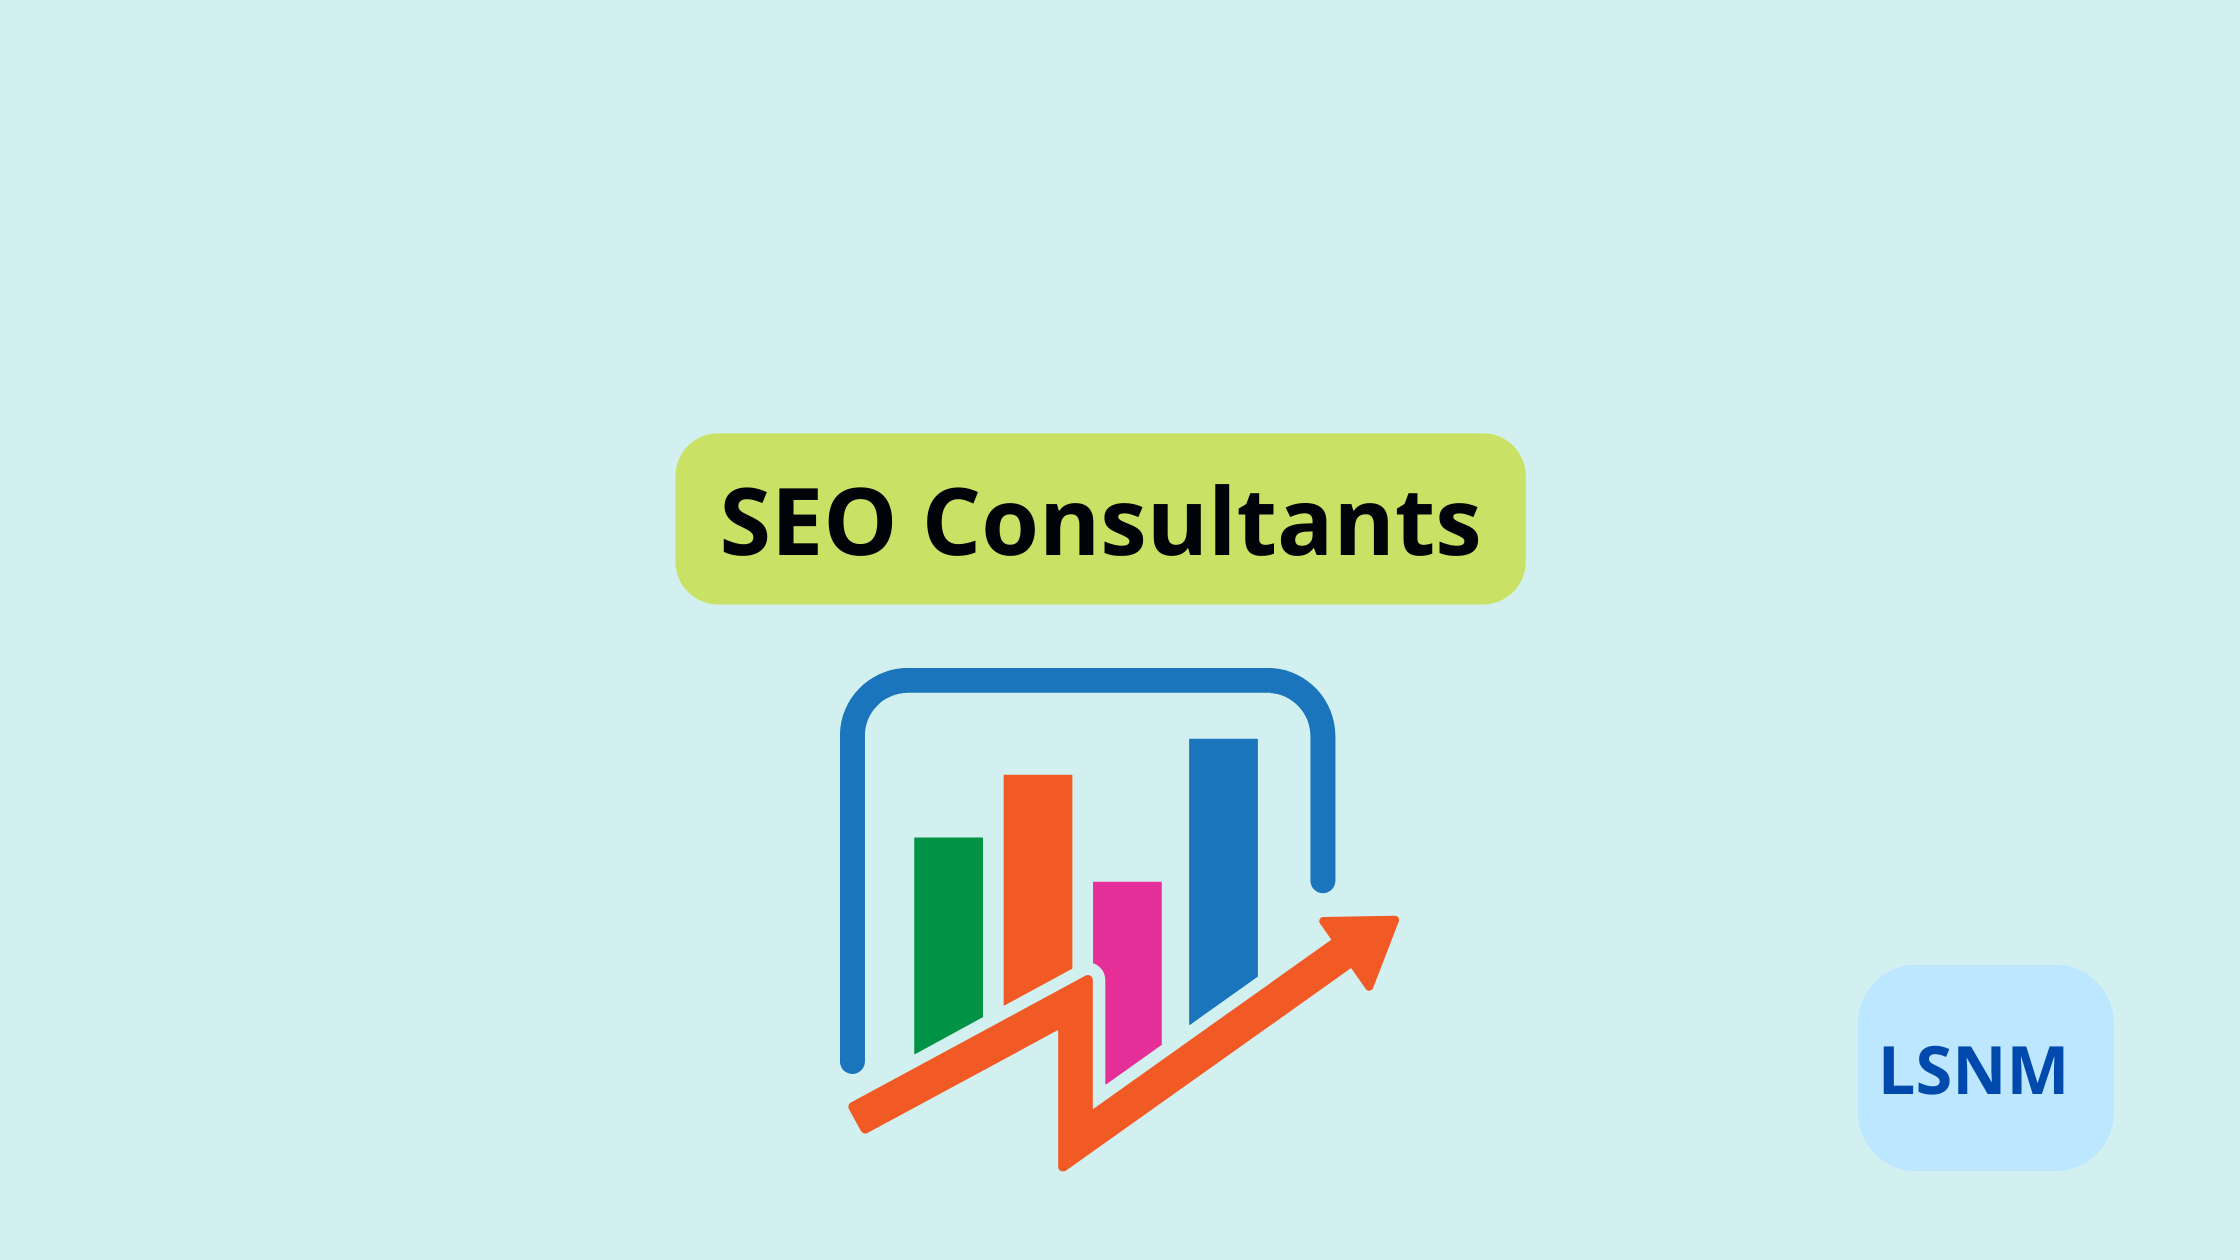 What do SEO Consultants do